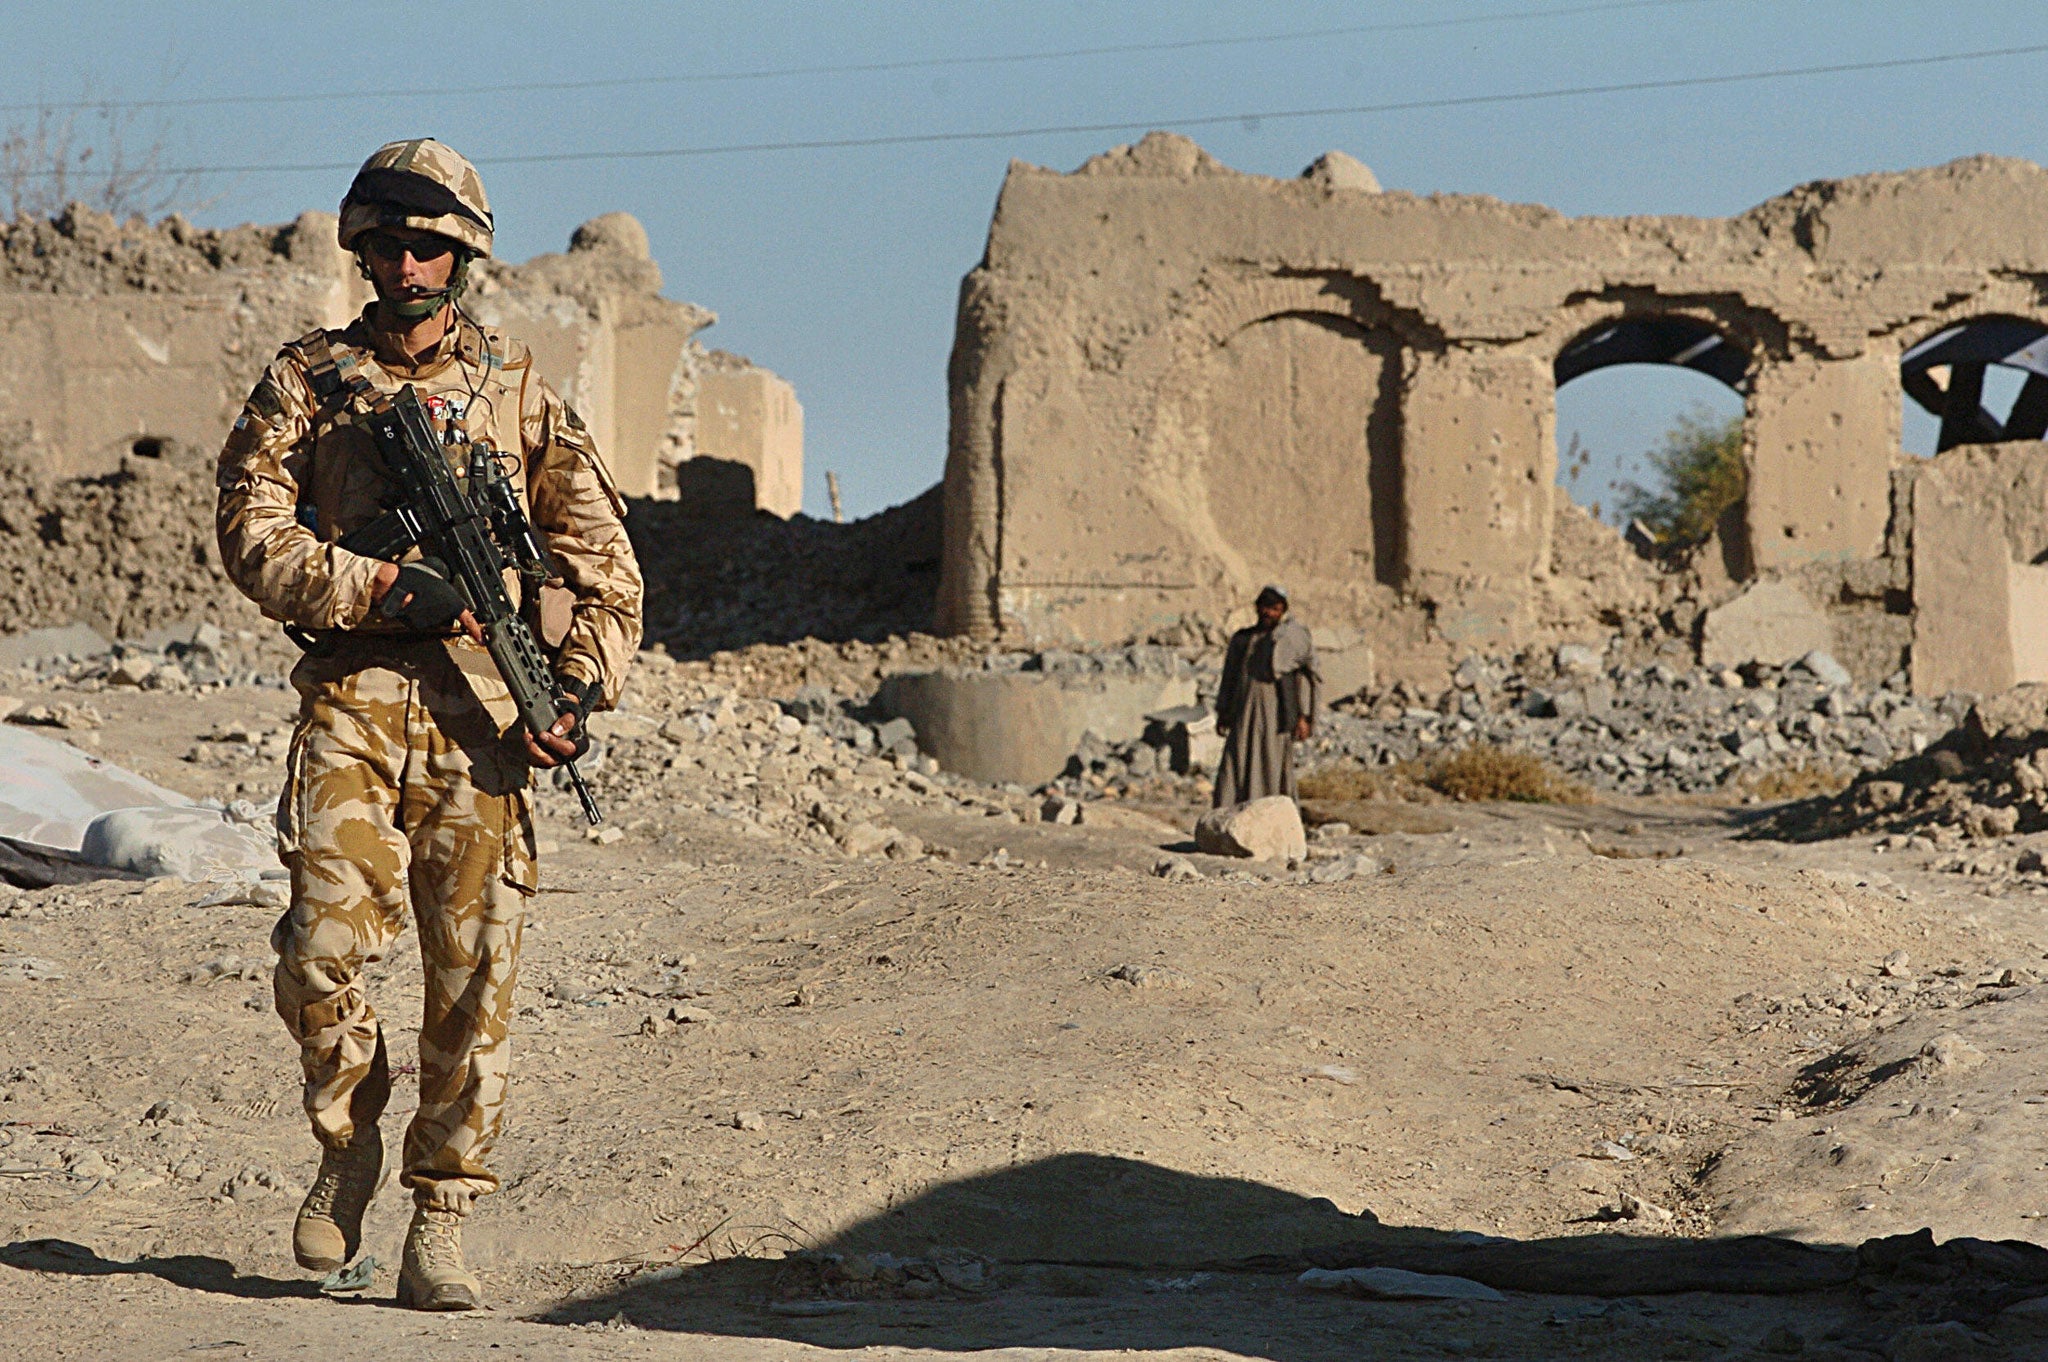 Human cost of war: A British soldier on patrol in Helmand province